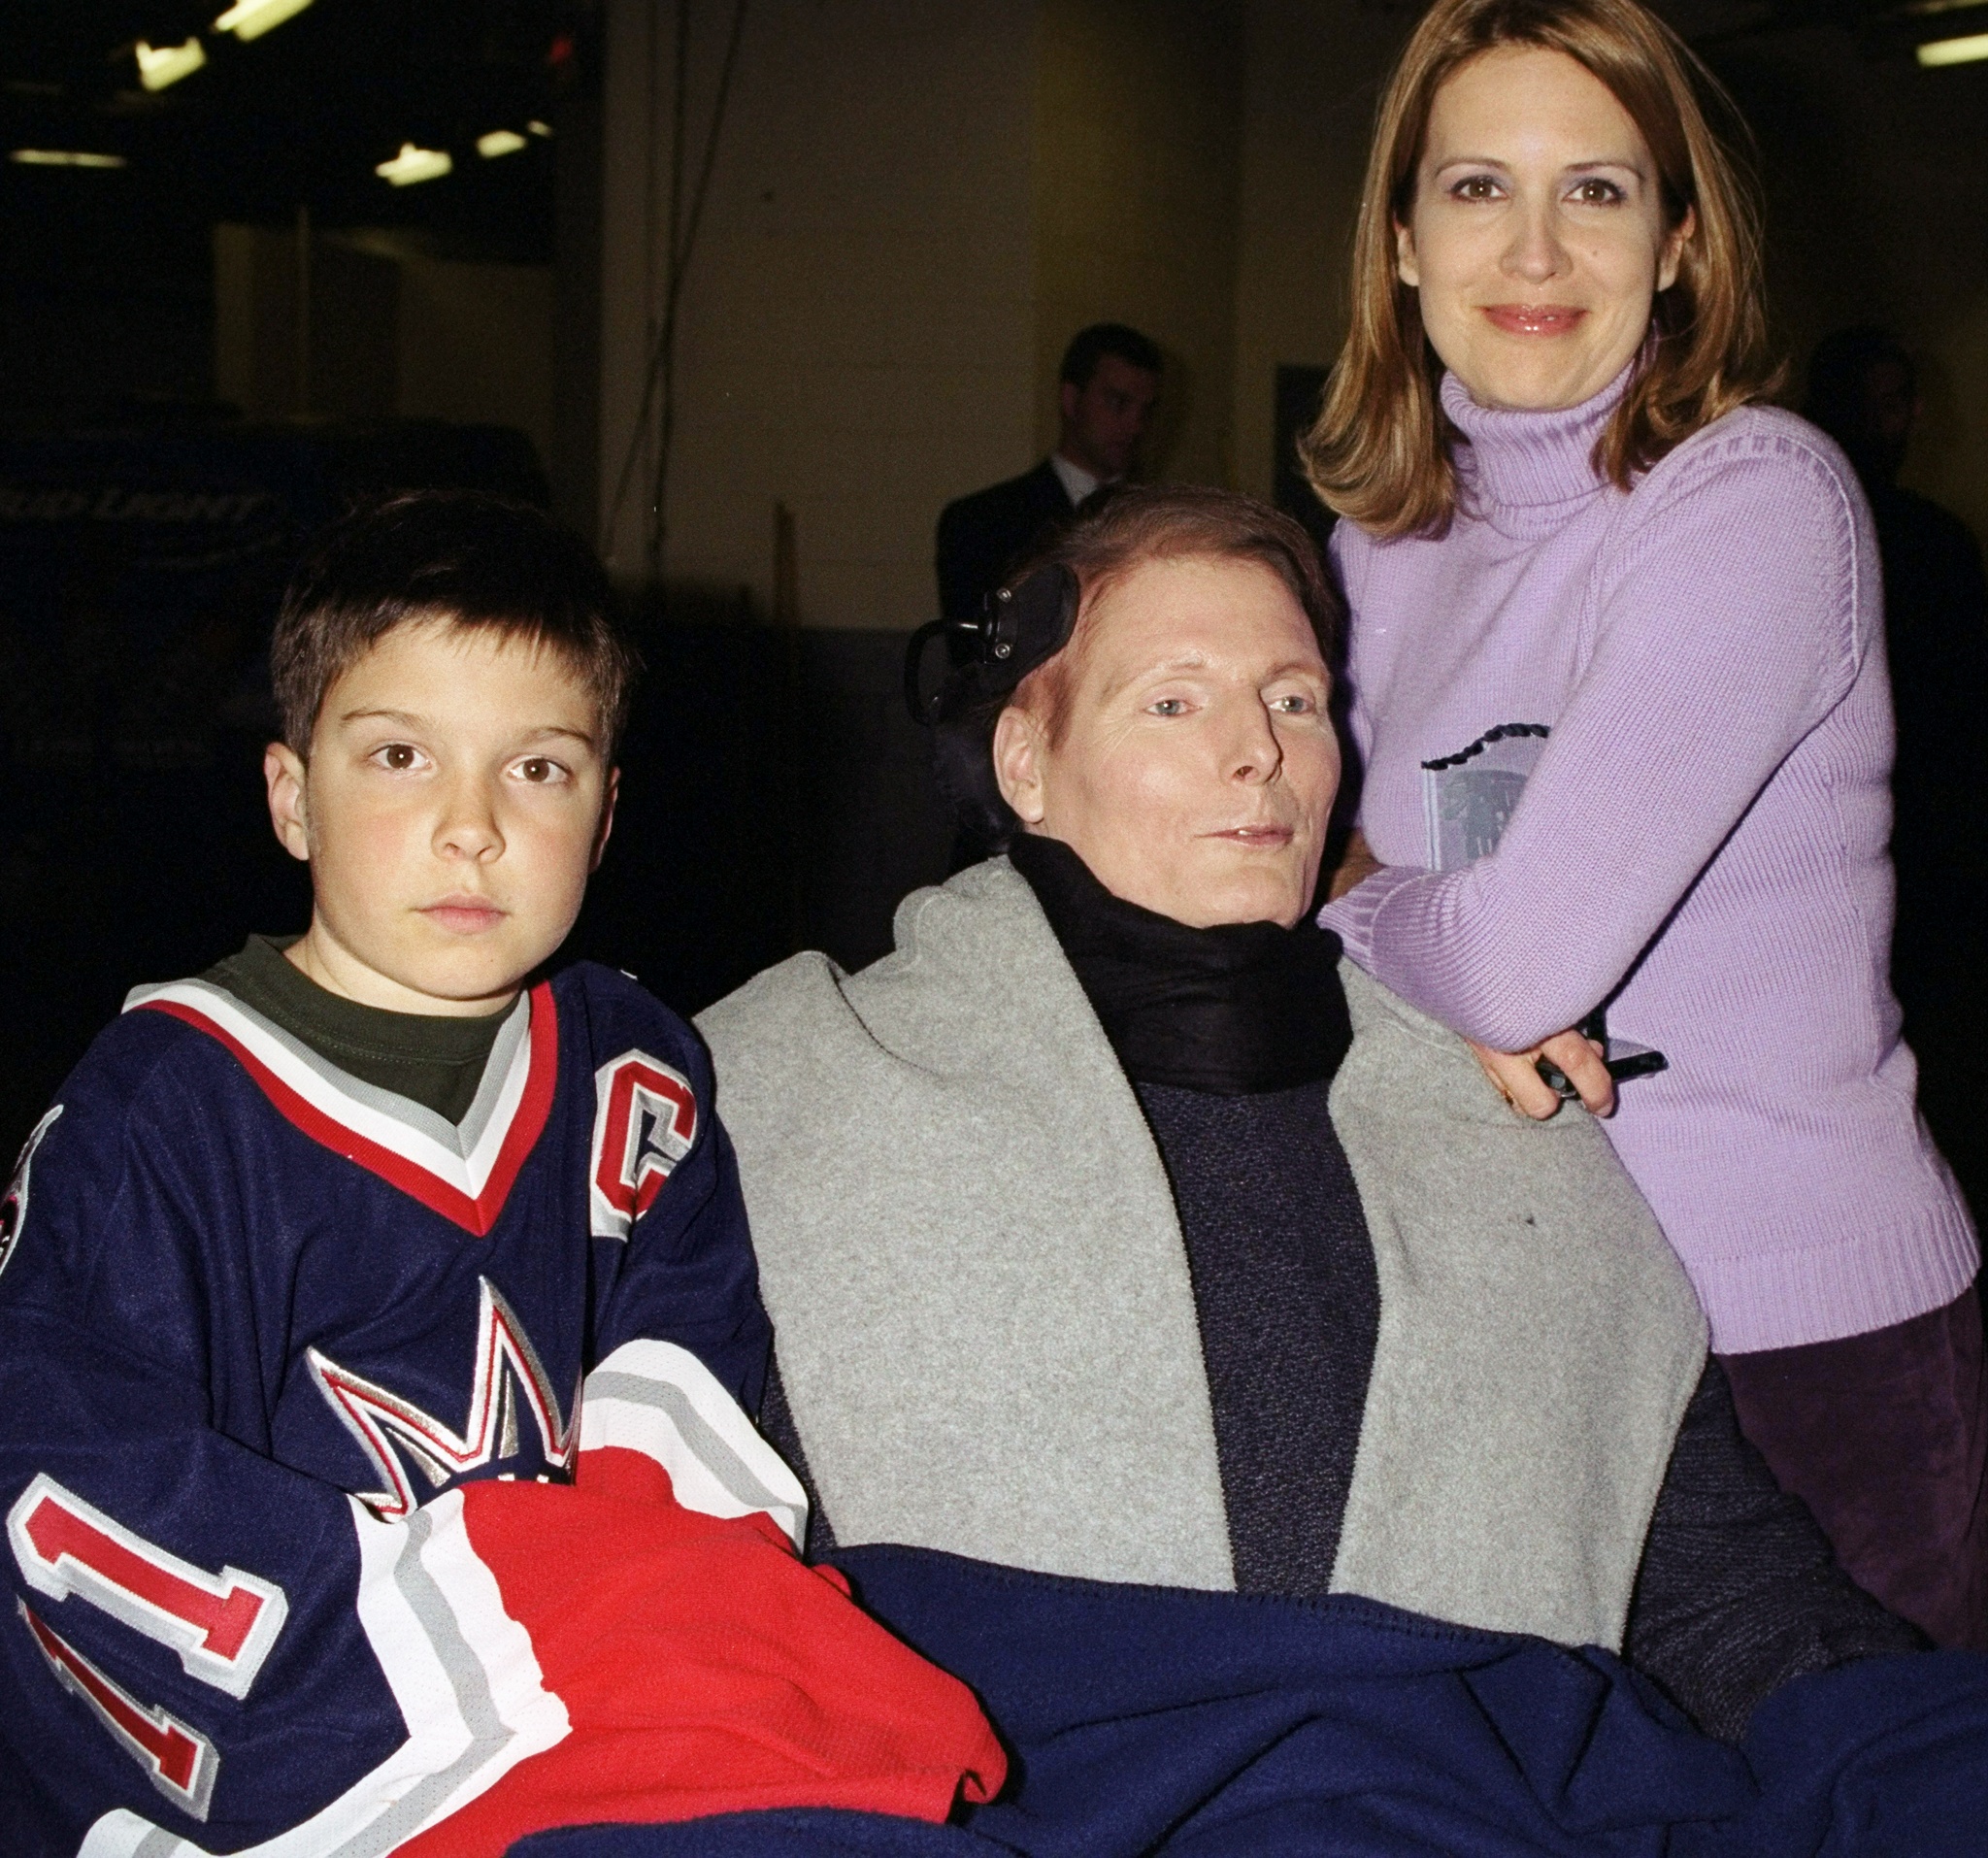 Will, Christopher et Dana Reeve à SuperSkate 2001 au Madison Square Garden | Source : Getty Images